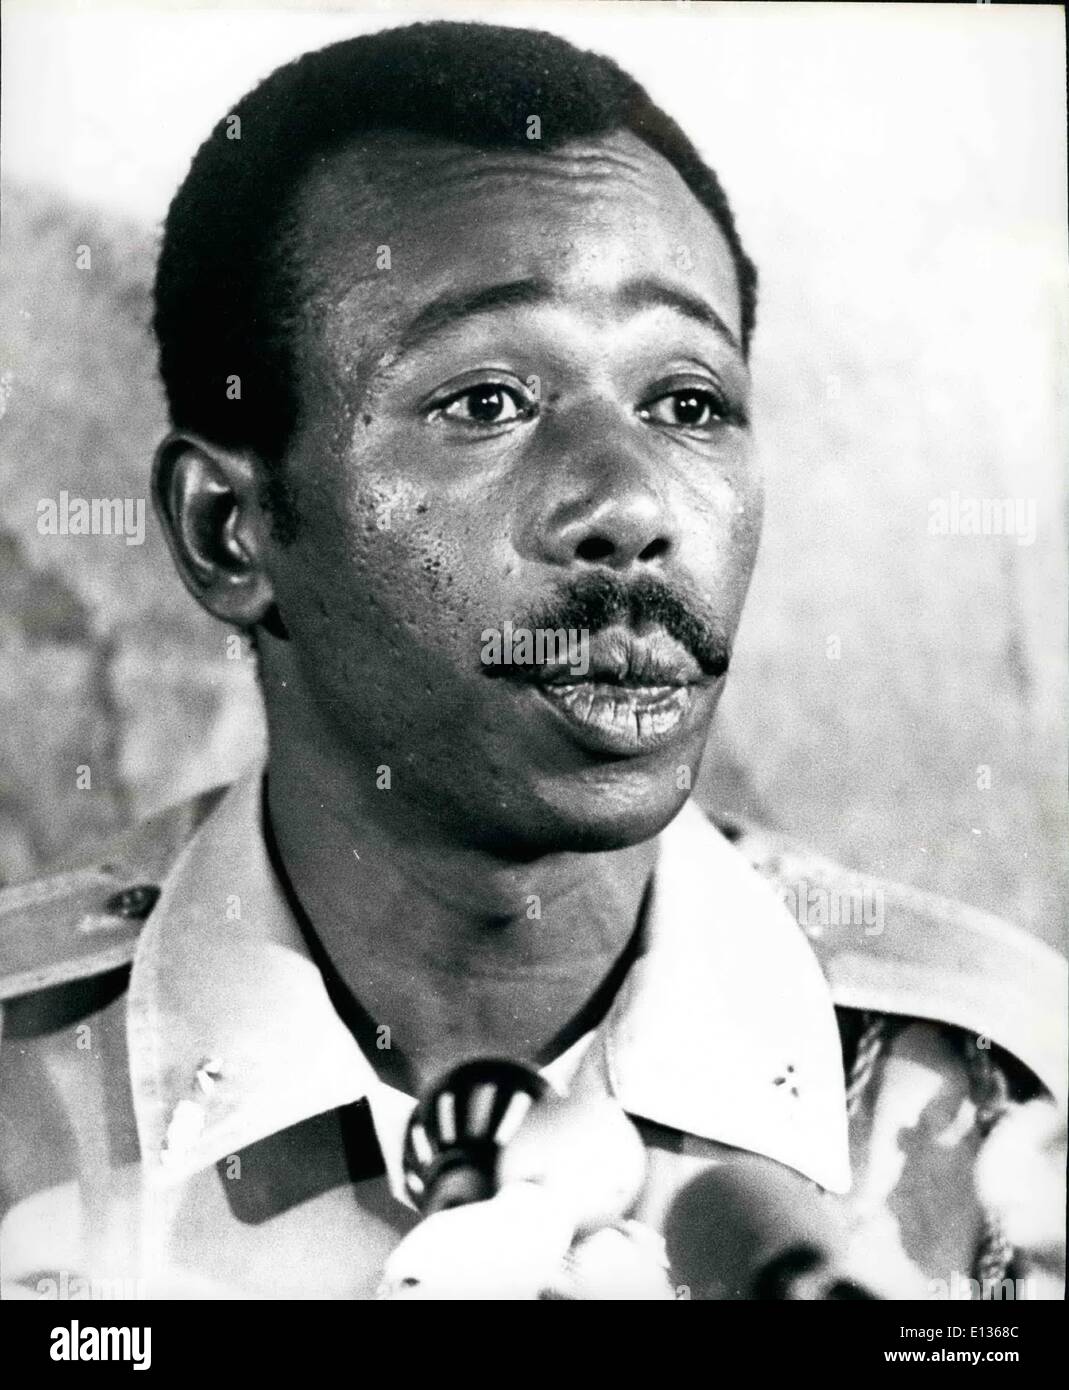 Feb. 28, 2012 - Mengistu. Ethiopia Lt. Col. Mengistu Haile Mariam, Chairman of the Ethiopian Provisional Military Administrative Council. He is also the Head of State and the most powerful man in Ethiopia. Stock Photo